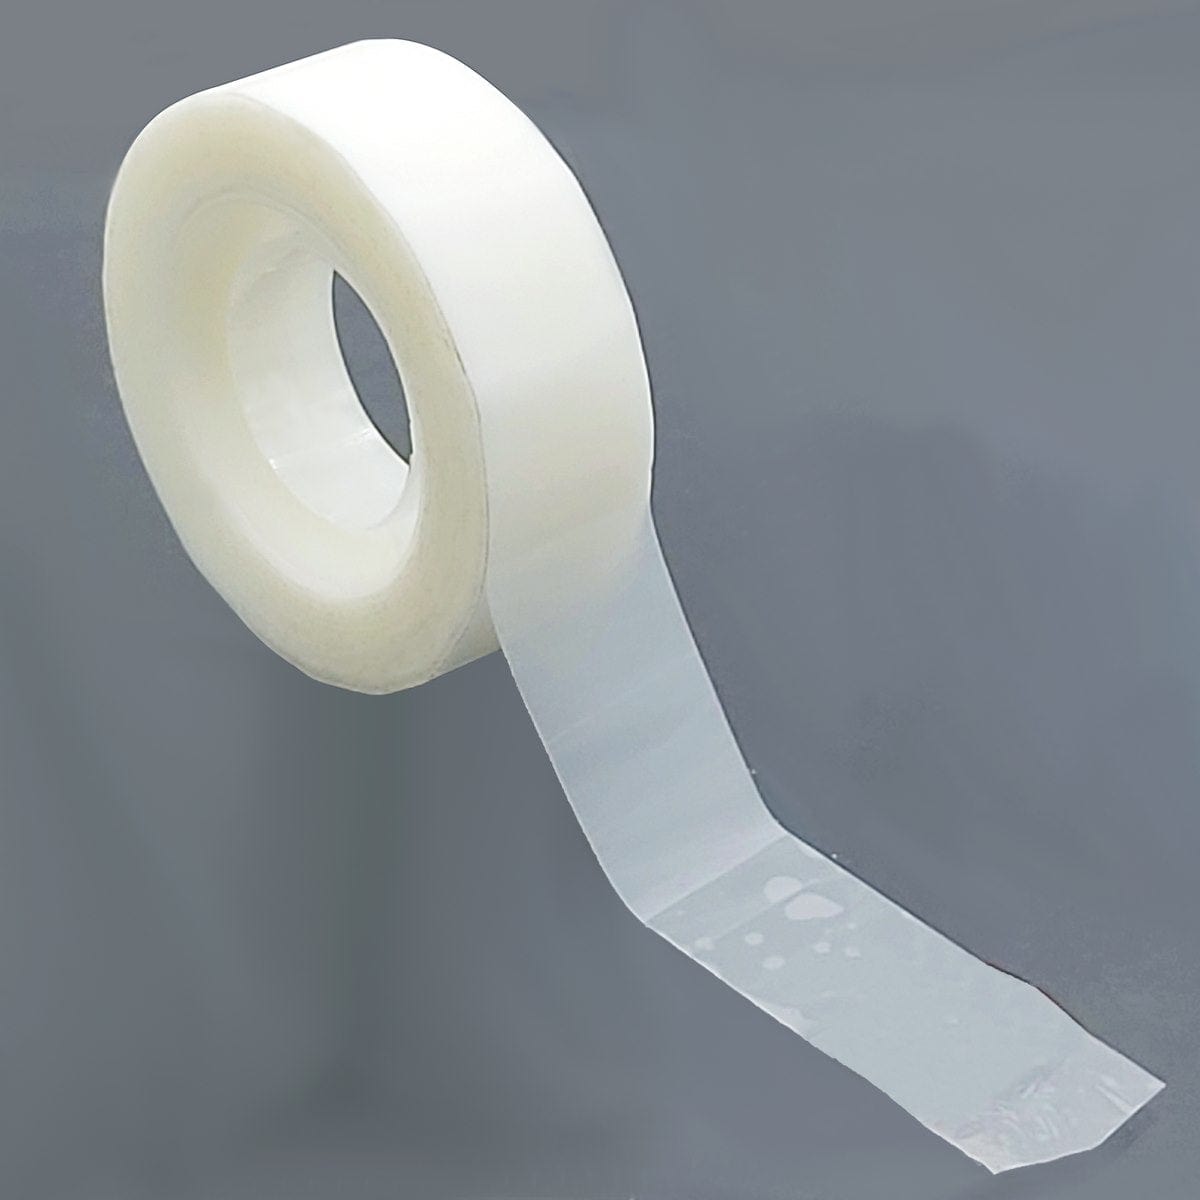 jags-mumbai Tape Invisible Tape Easy to Remove Craft Tape Glueless Tape